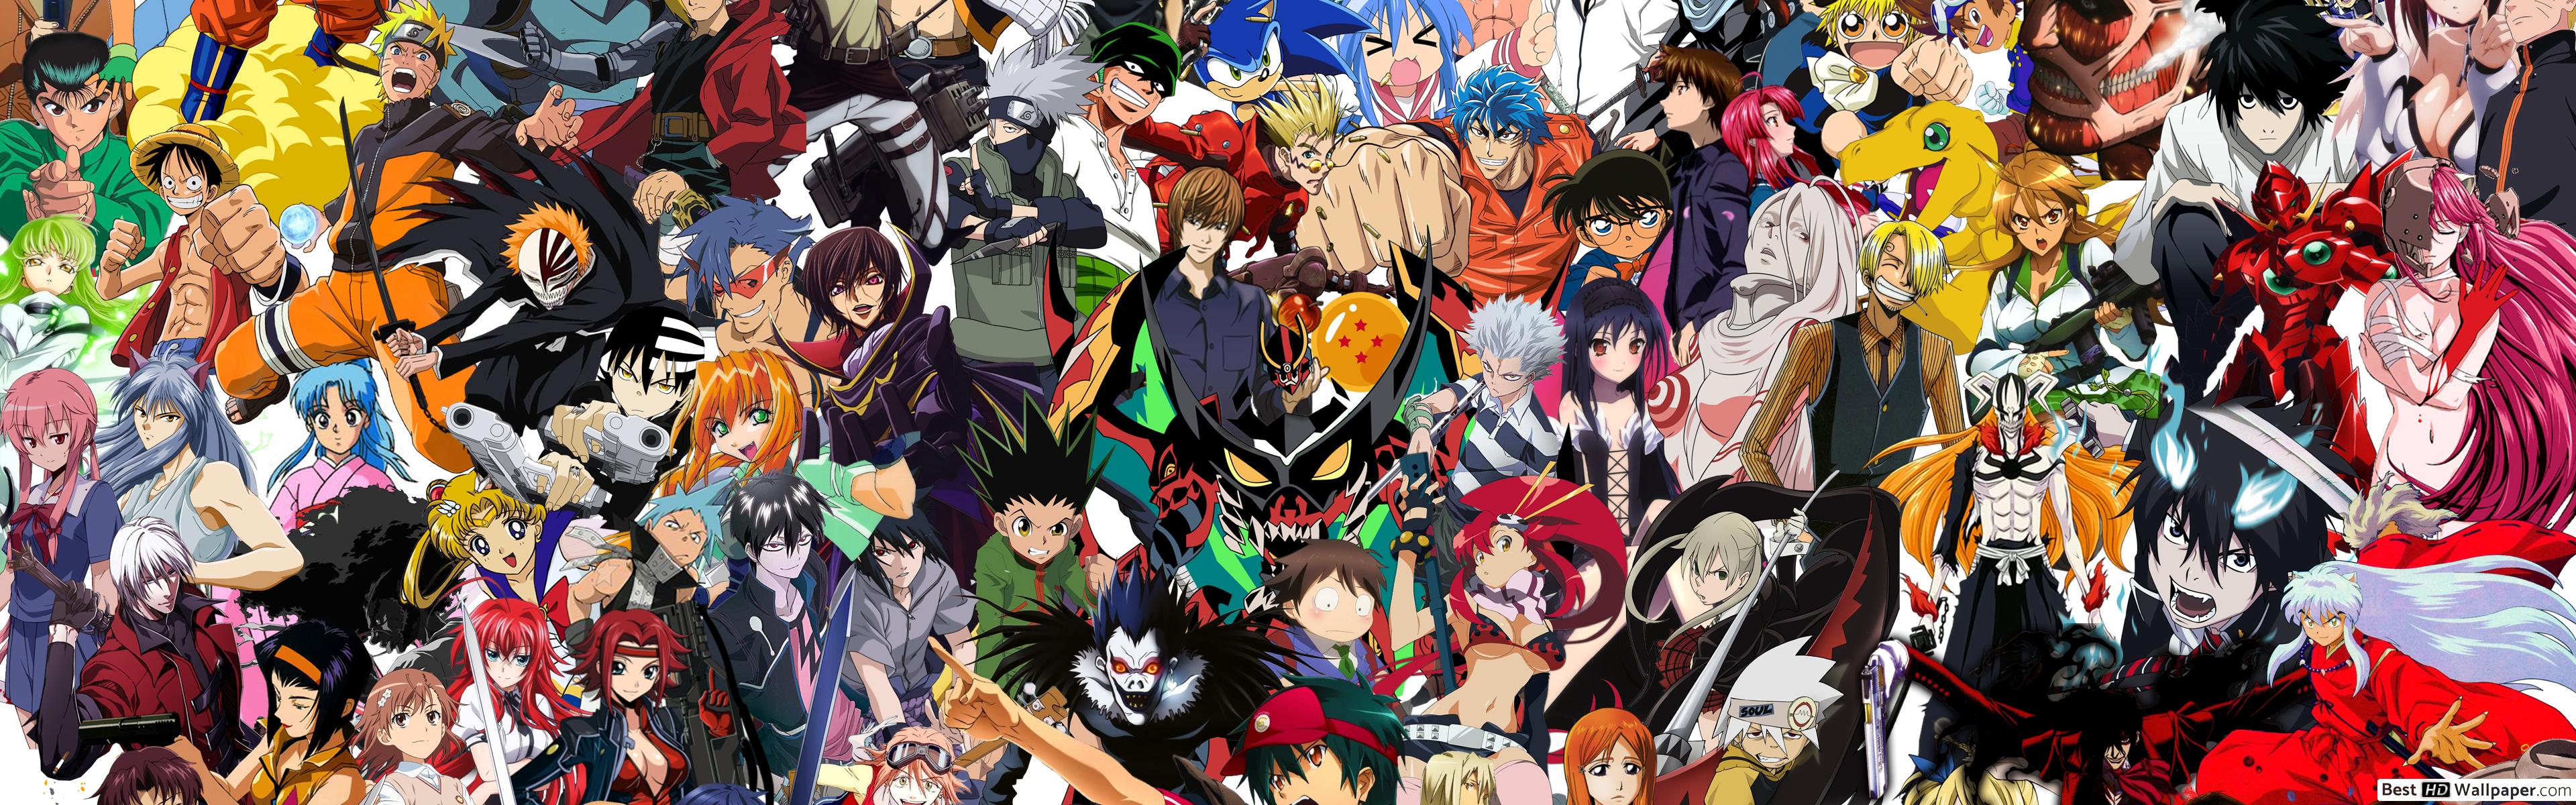 🔥 Free Download Anime Crossover Poster Hd Wallpaper Download [3840X1200